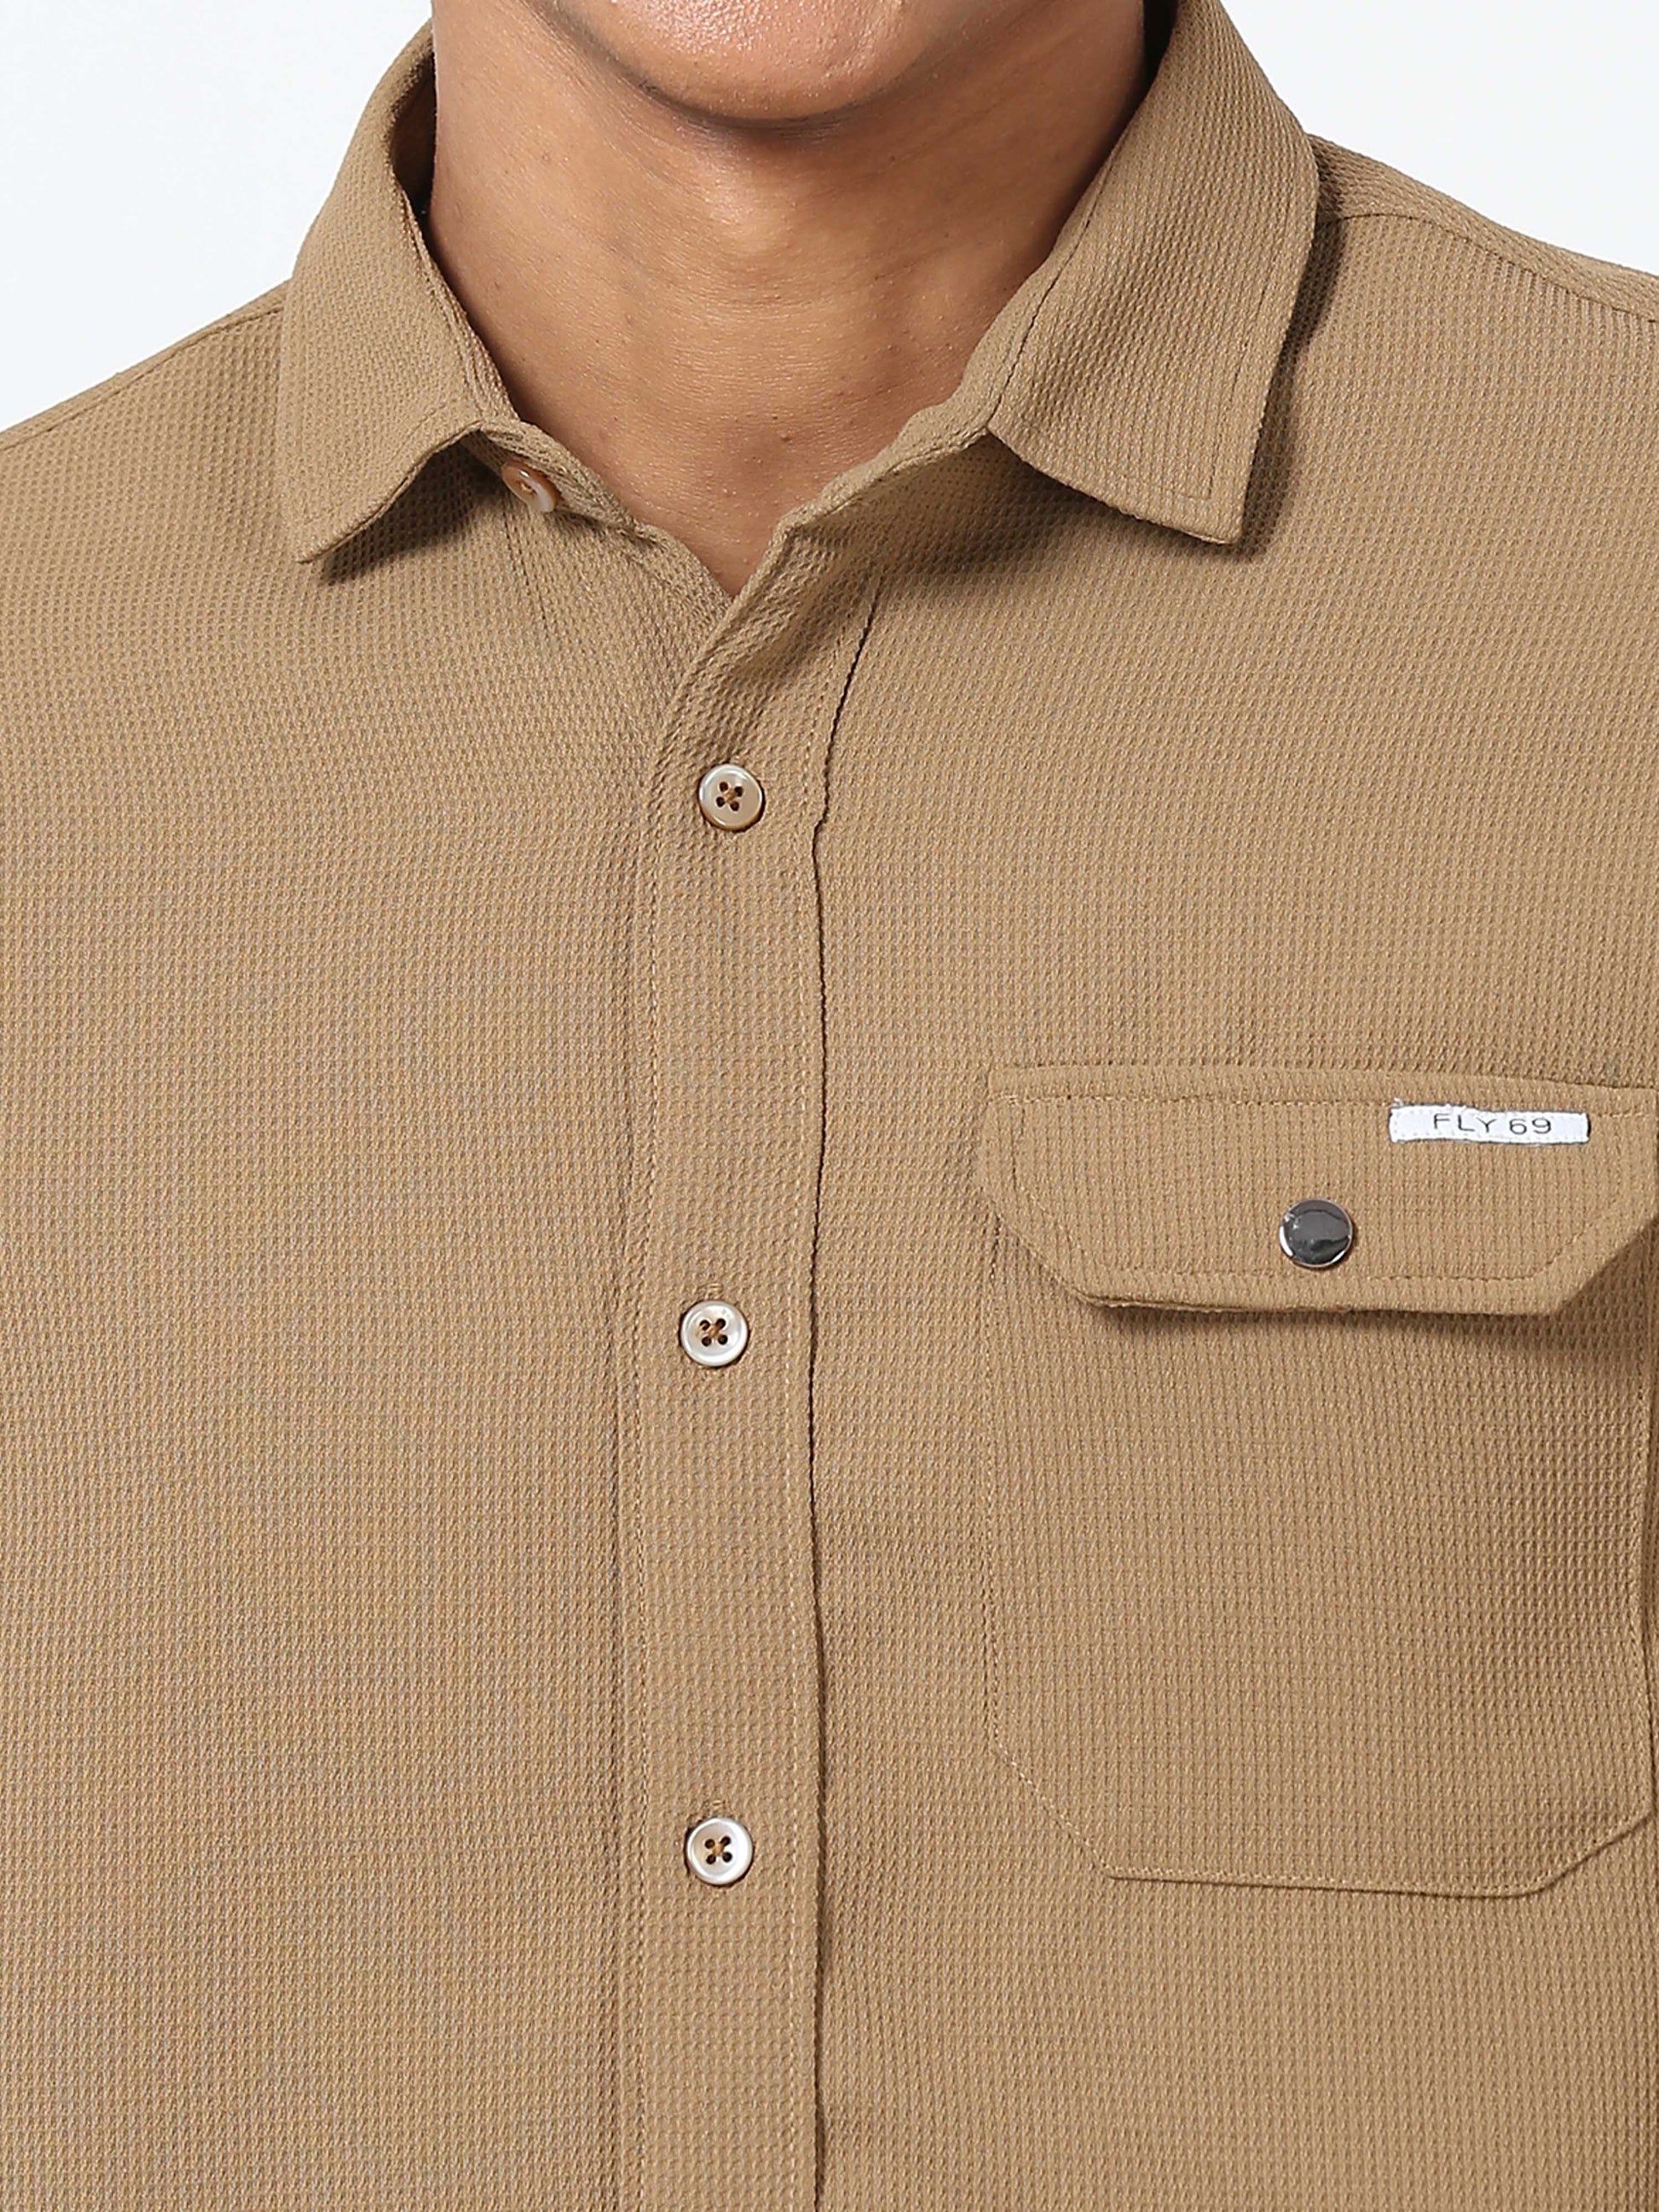 Mongoose Solid Shirt for Men 